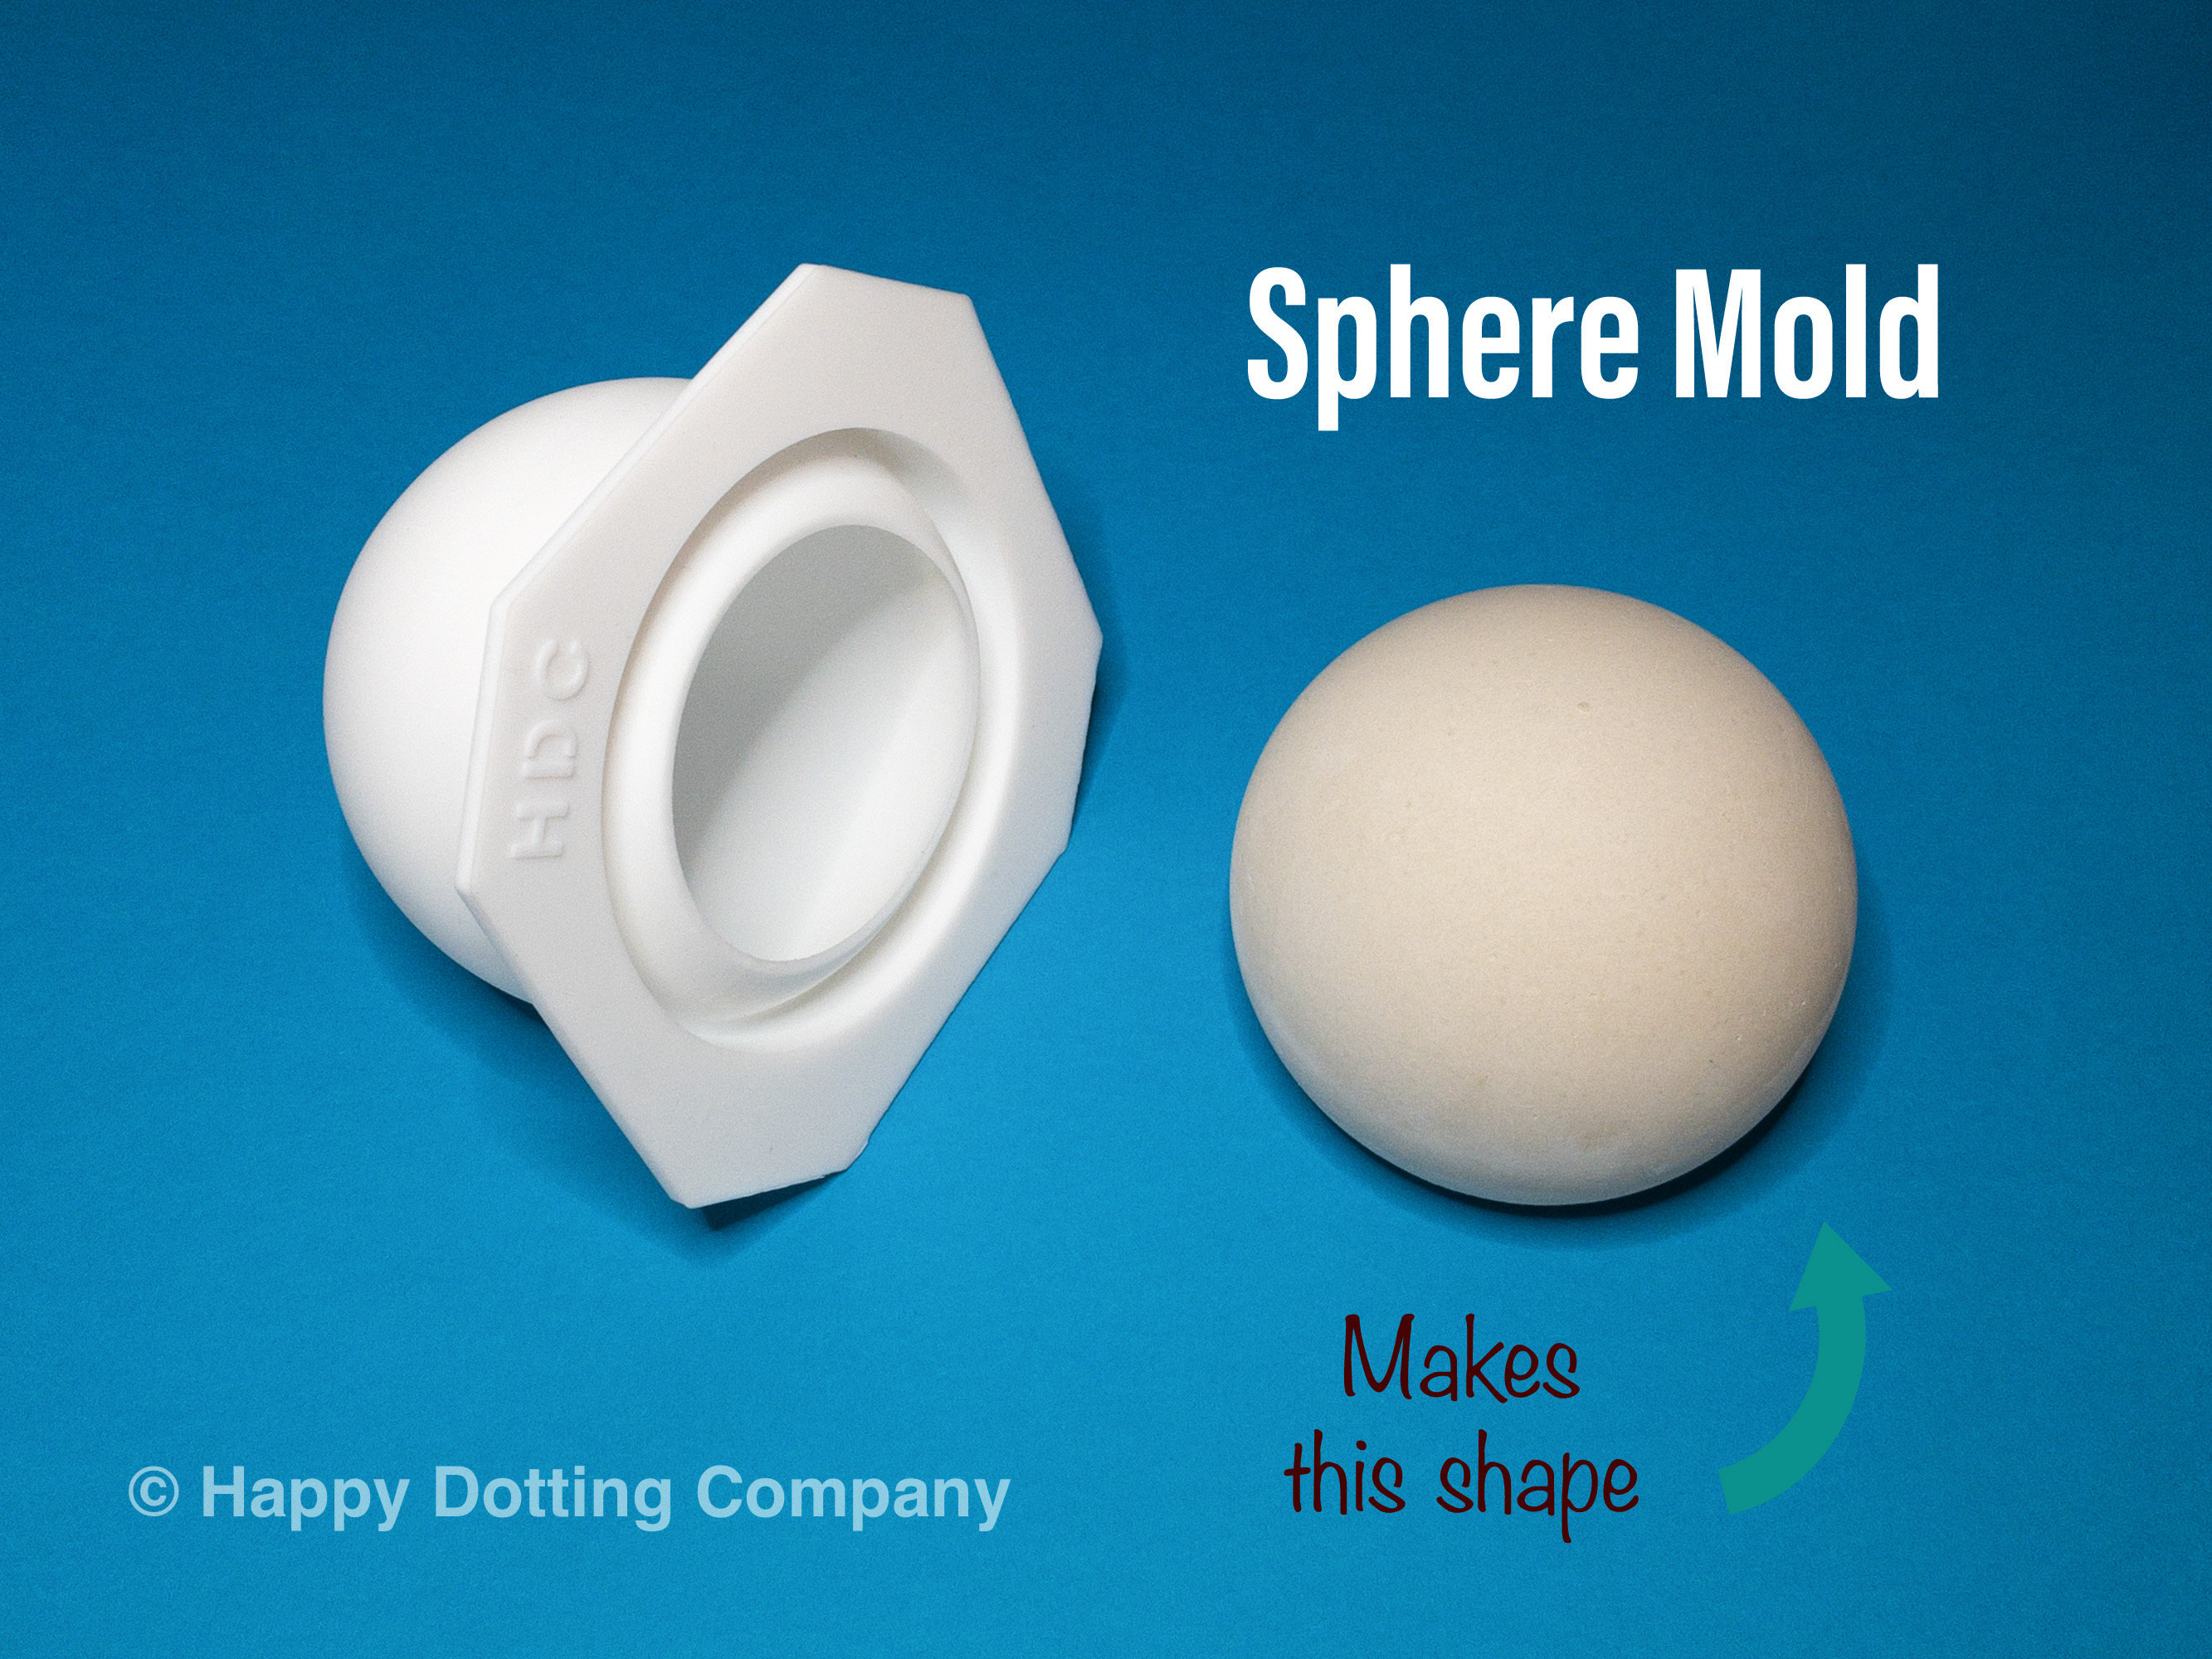  Stone Mold - For Making Stones For Painting - Happy Dotting  Company - Large Round Shape - Smooth Casting